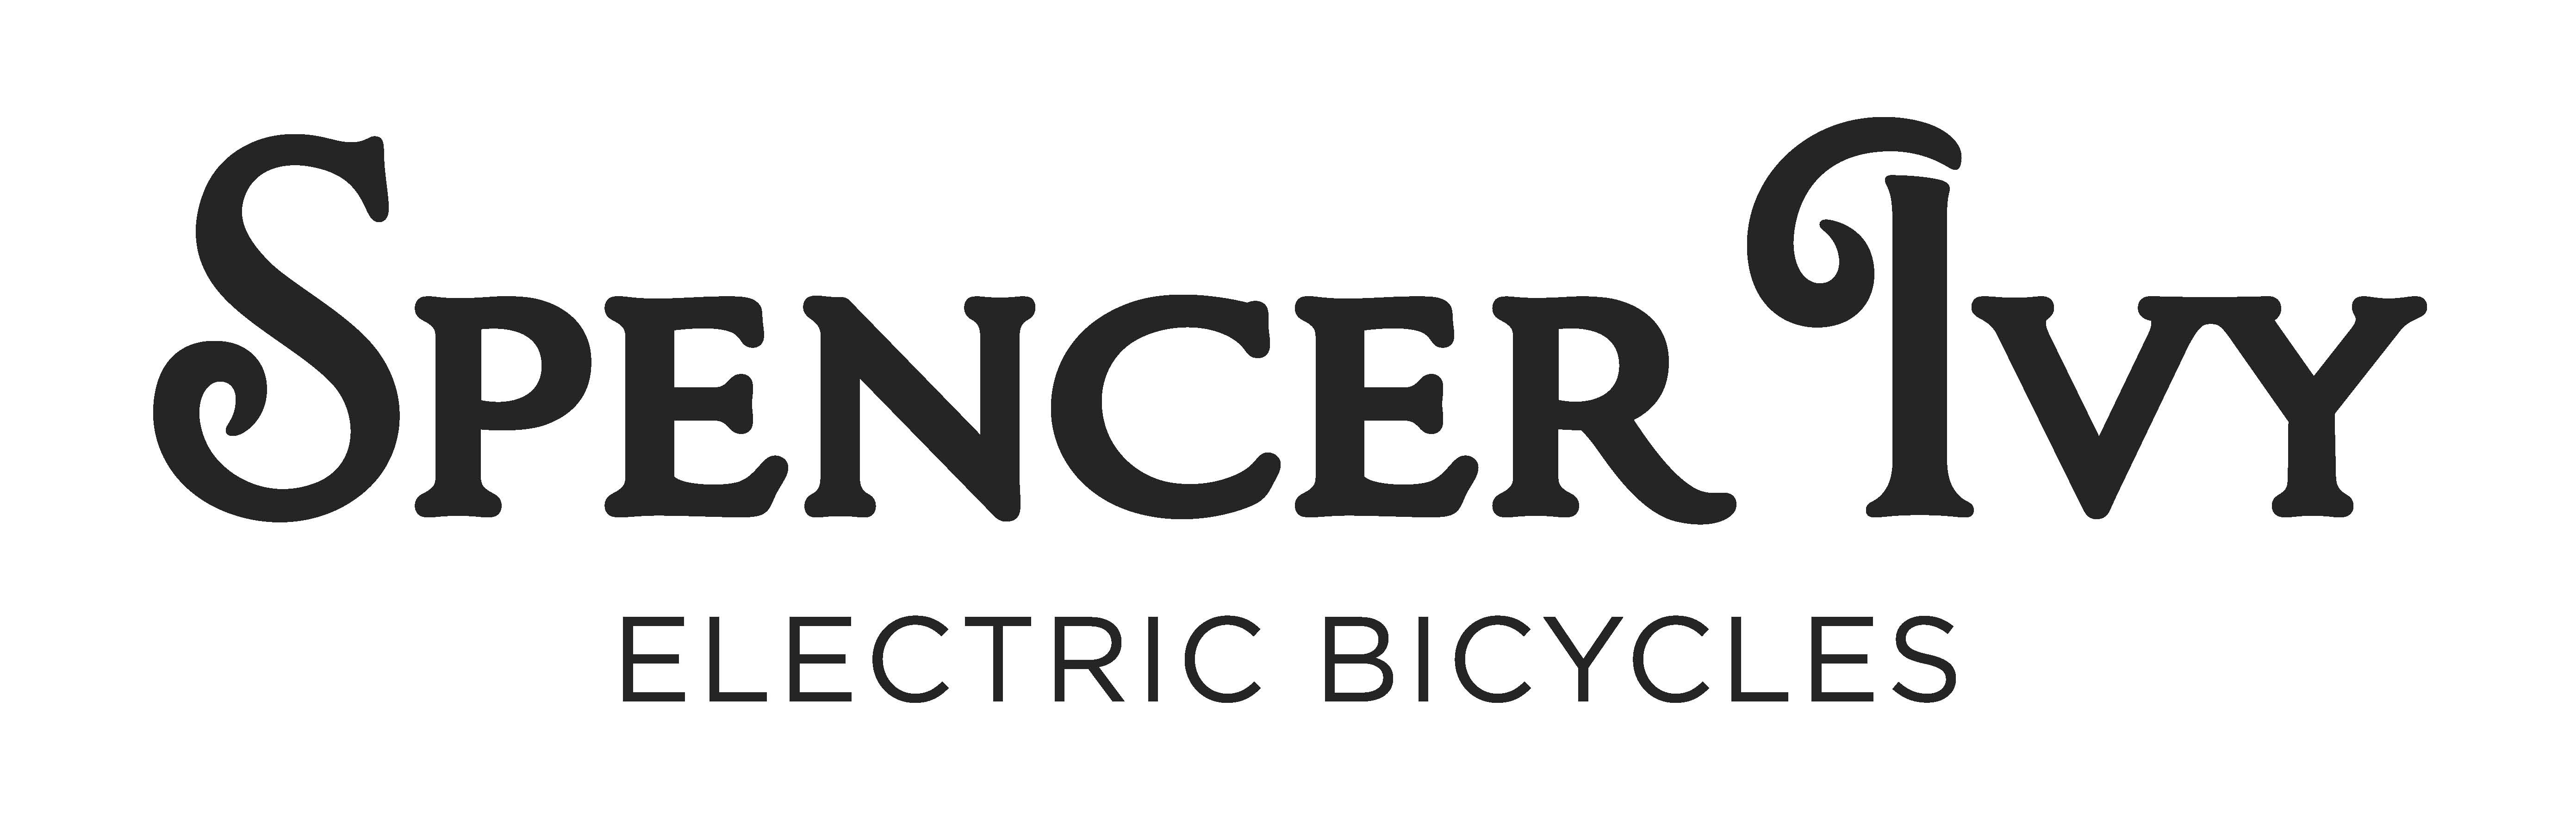 Spencer Ivy Electric Bikes